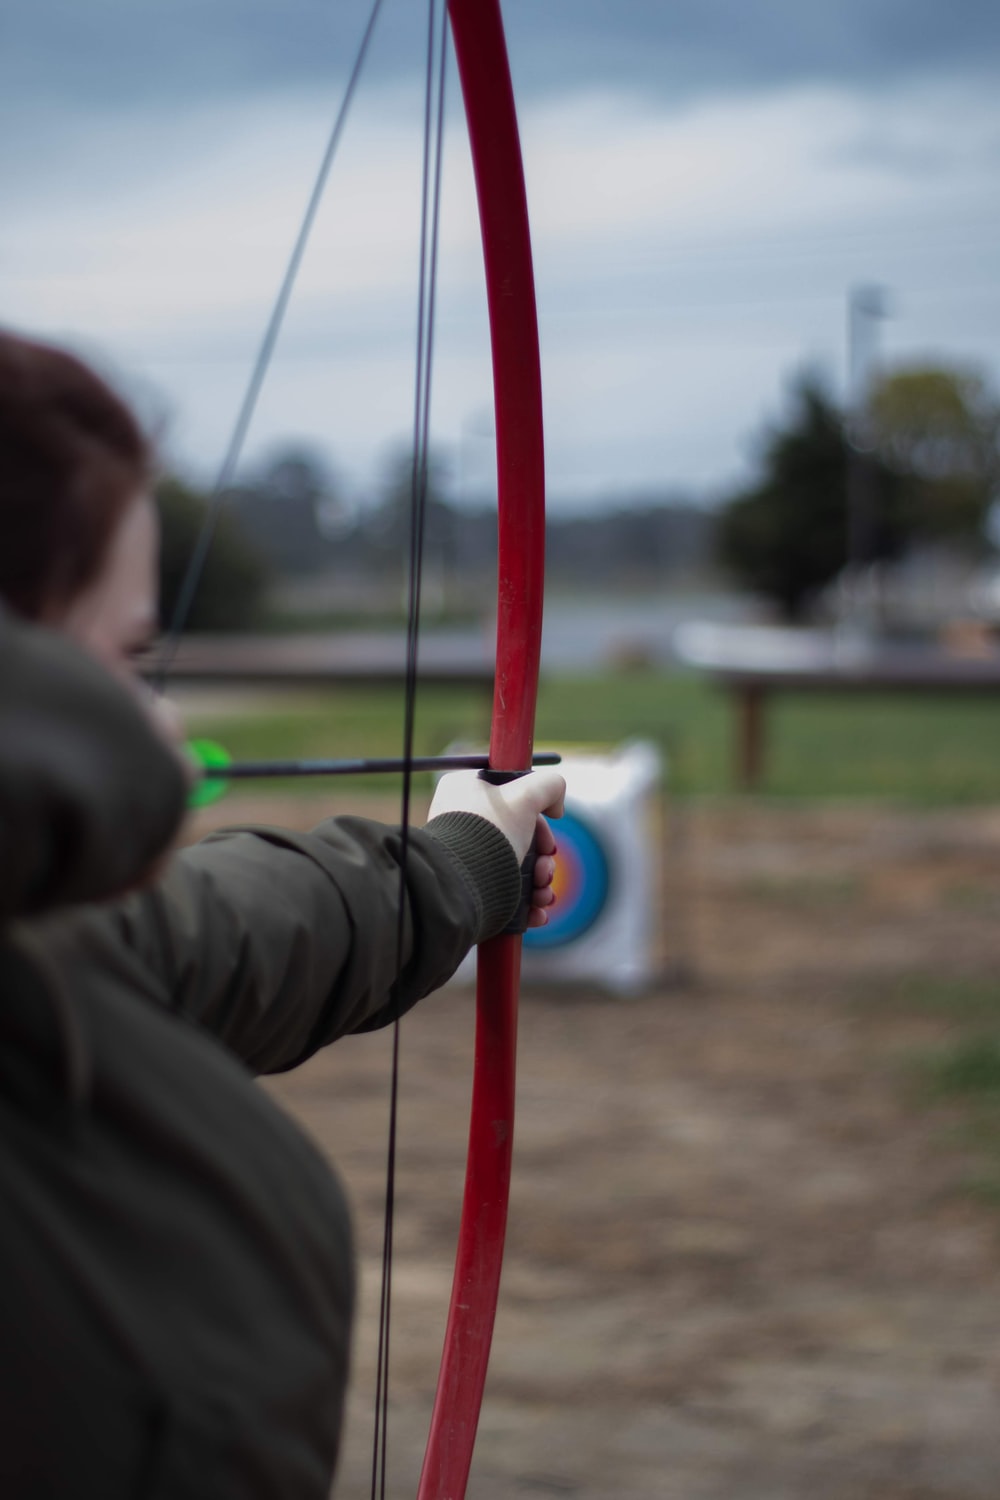 Best Bow And Arrow Picture [HD]. Download Free Image